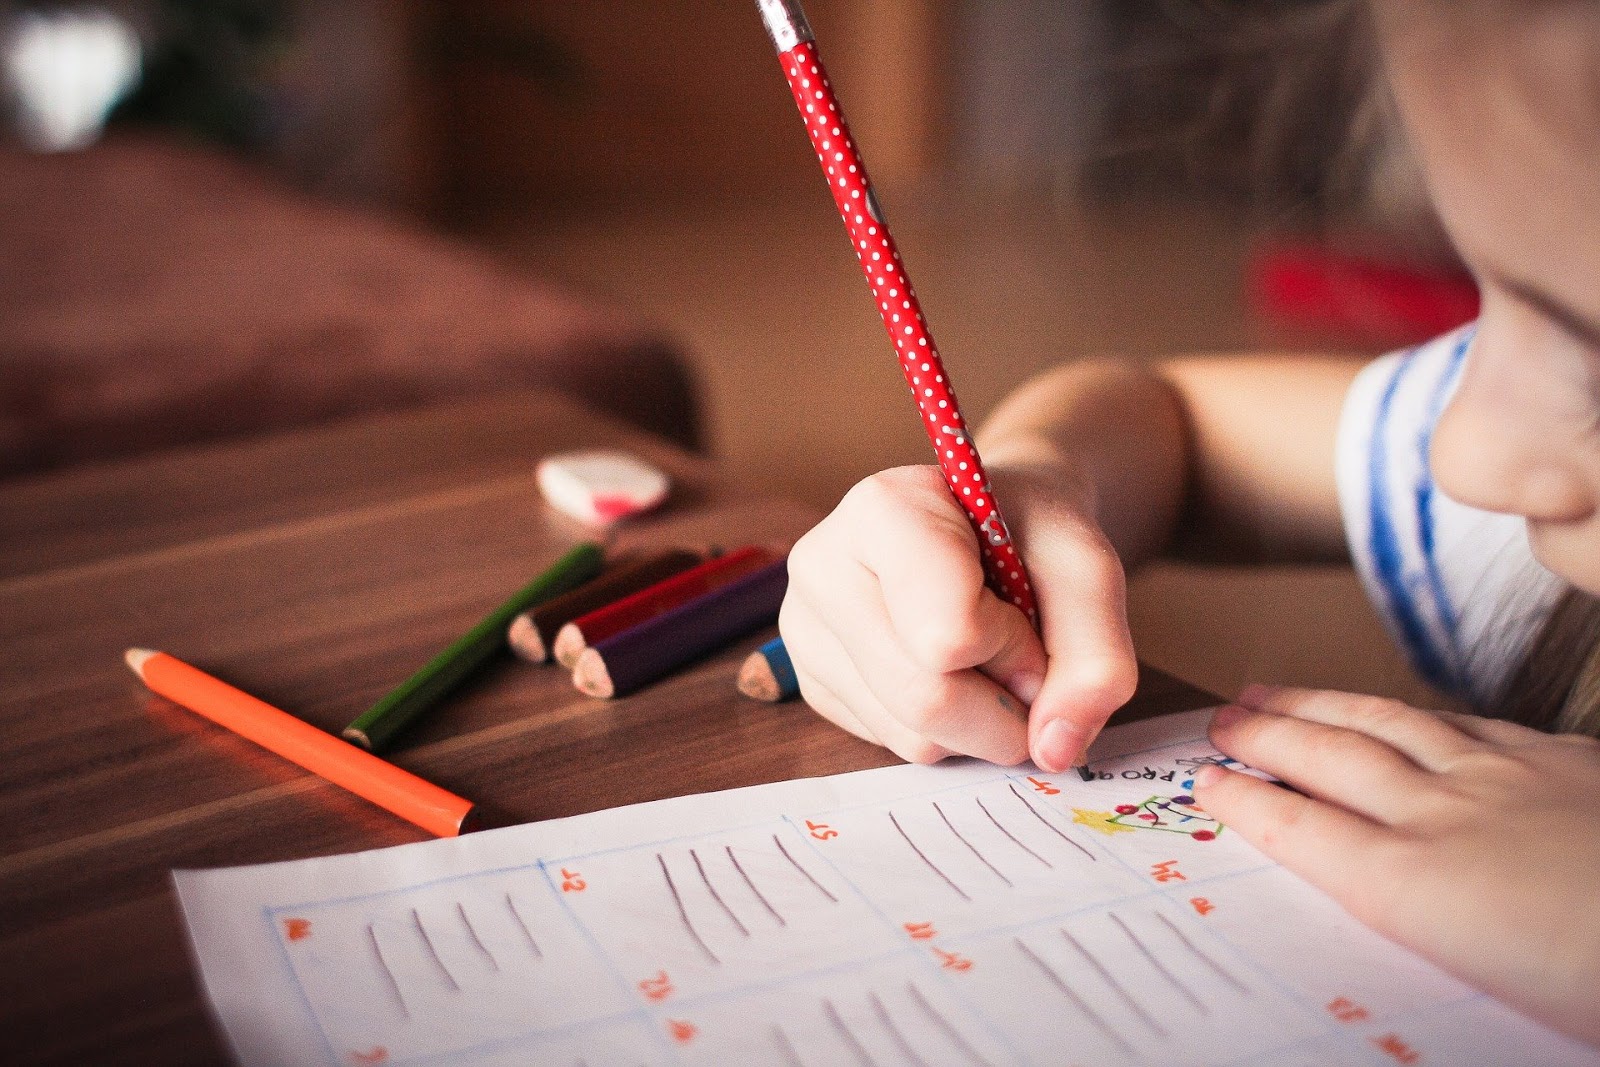 This is a color image of a child coloring on a piece of paper. There are several colored pencils on the table, and the child is holding a red pencil in their right hand.